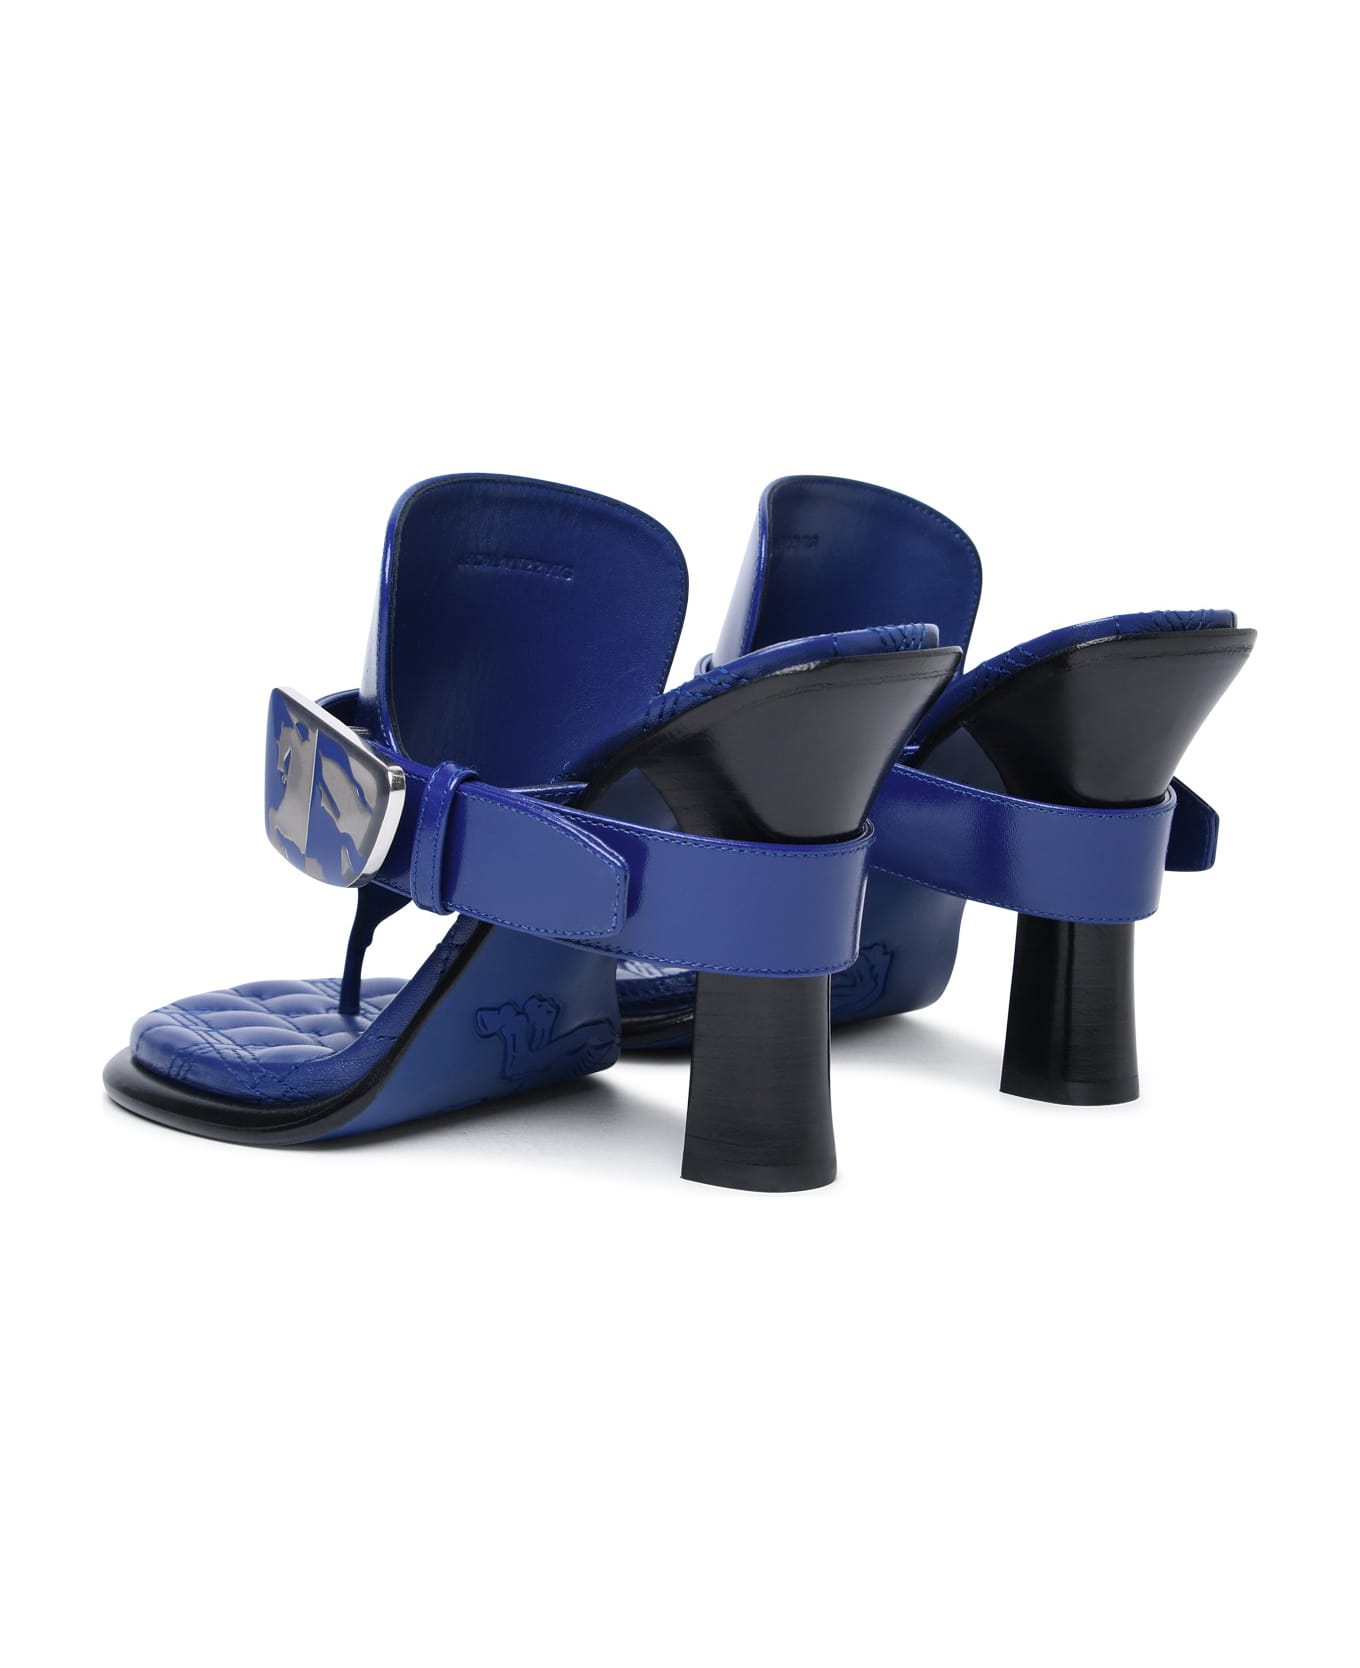 Burberry 'bay' Blue Leather Sandals - Blue サンダル